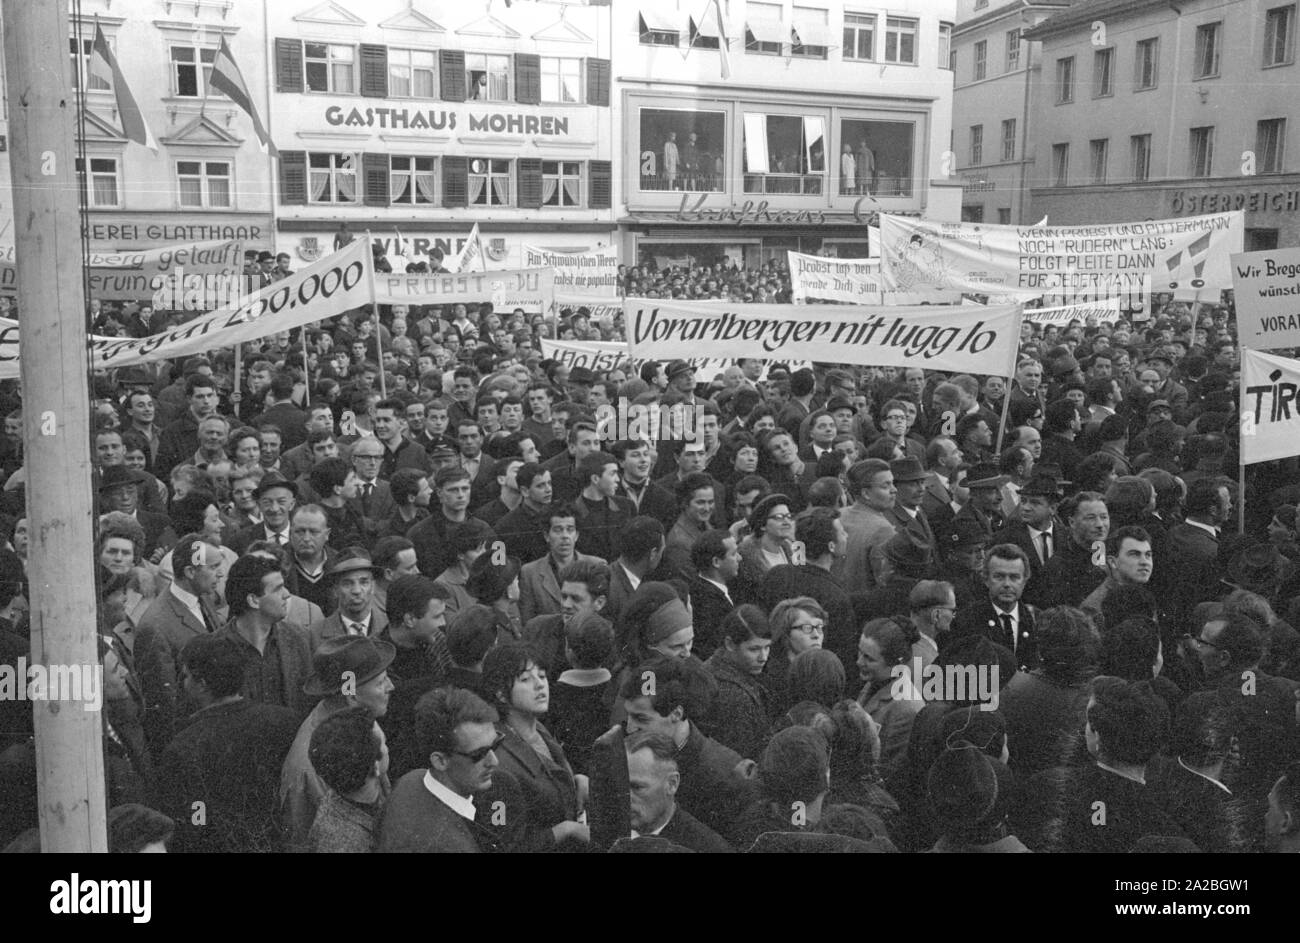 People demonstrate on the Kornmarktplatz in Bregenz, they want the newest ship of the Austrian Bodensee fleet to be named 'Vorarlberg'. The inhabitants of the homonymous federal state reject the ship name 'Karl Renner'.This public debate, which lasted from 1964 to 1965, went down in history as the 'Fussachaffaere' ('Fussach affair'). Stock Photo